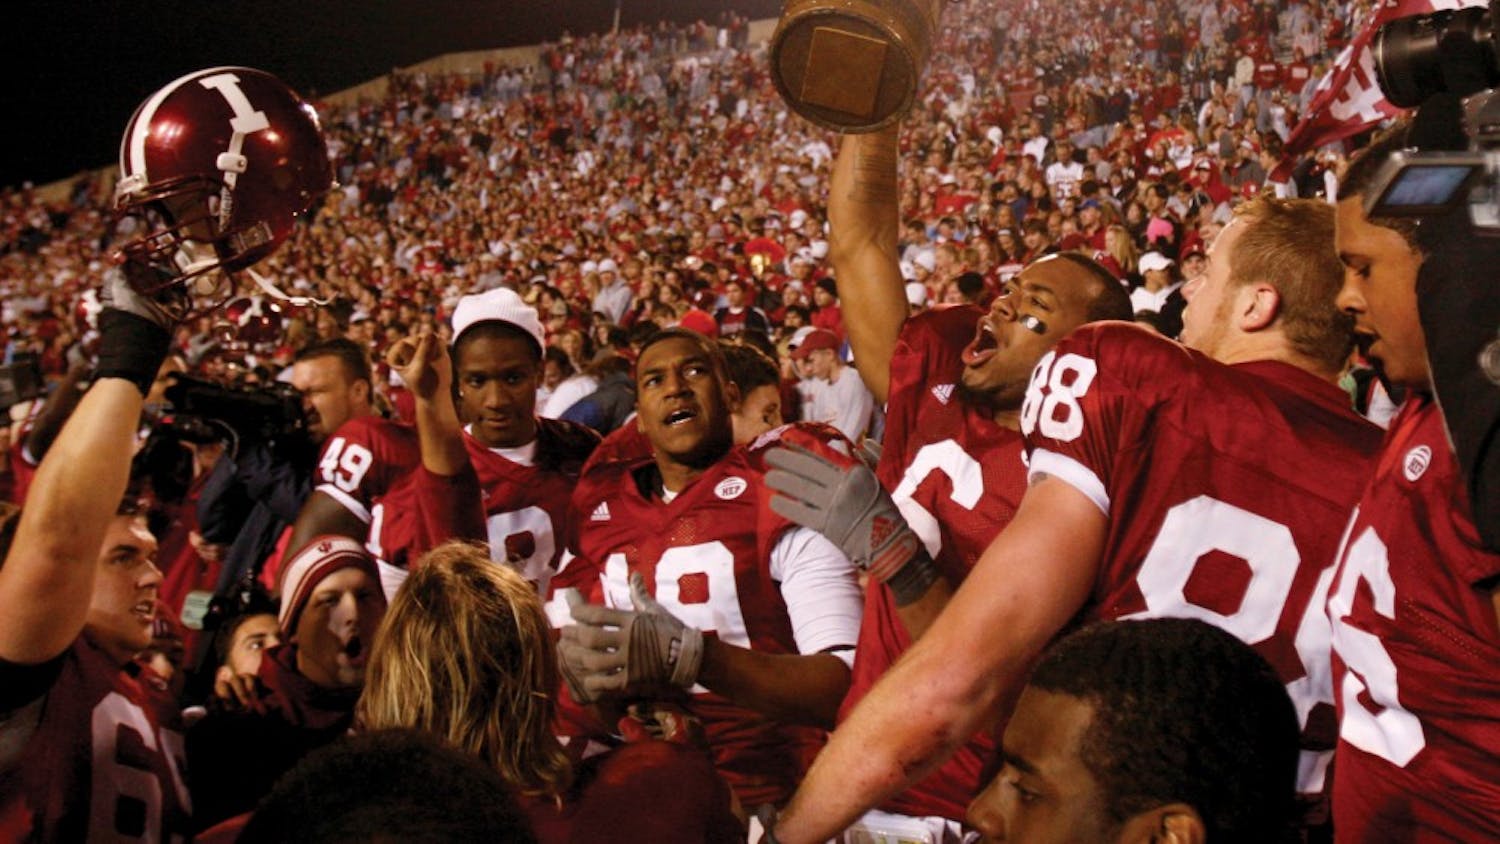 Members of the IU football team celebrate after winning the Old Oaken Bucket game against Purdue on Nov. 17, 2007. The victory meant IU finished the regular season with a 7-5 record, guaranteeing the Hoosiers a spot in a postseason bowl game.